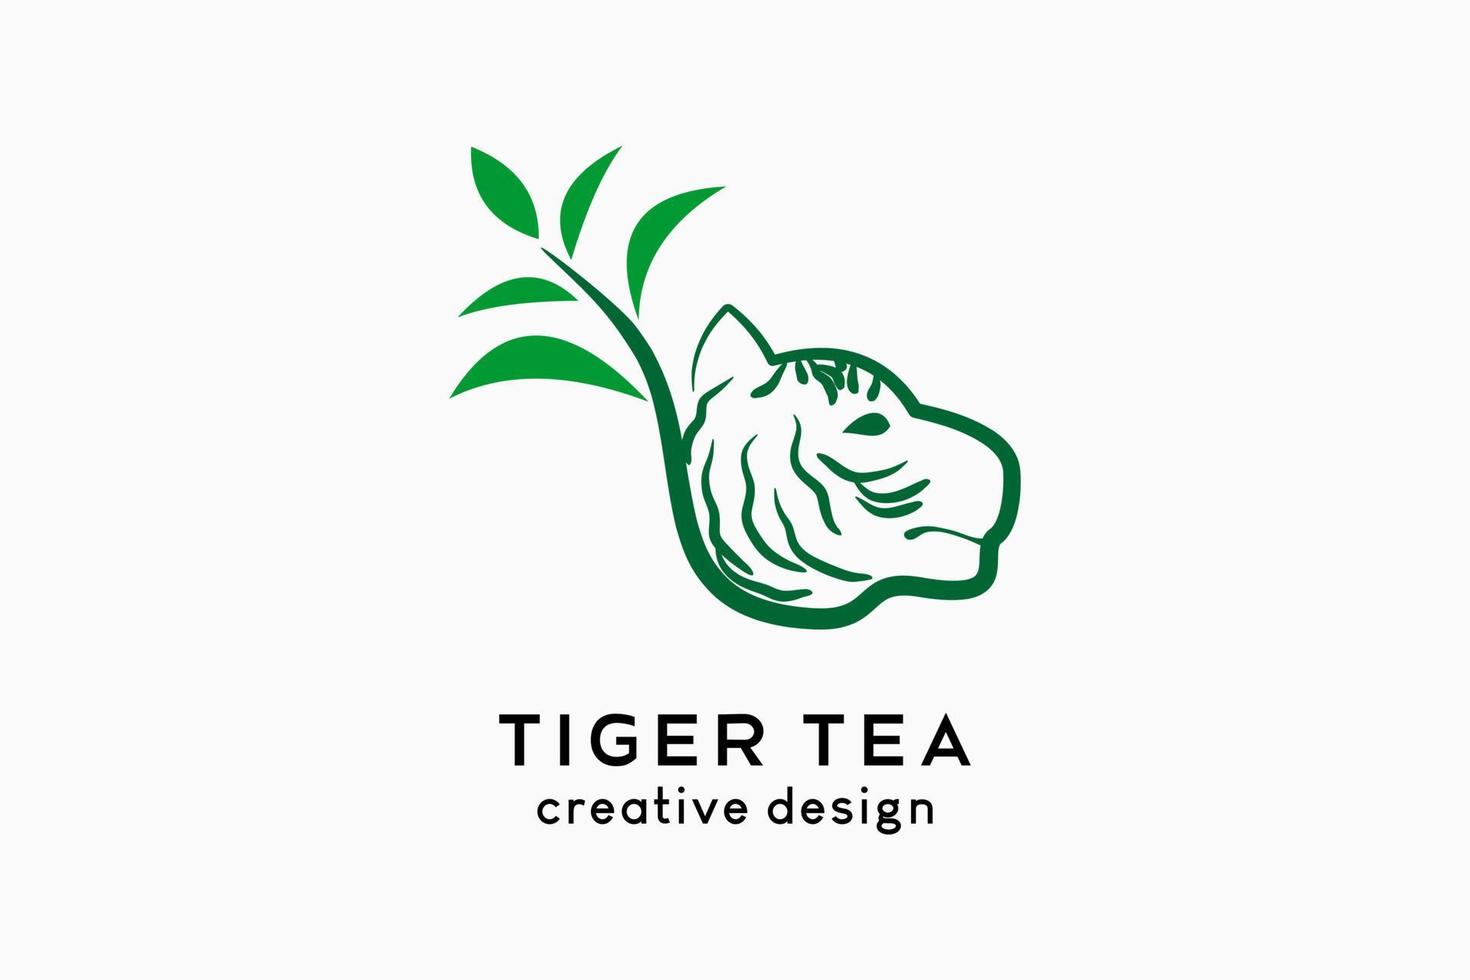 Tiger tea logo design, tea icon combined with tiger head with creative concept. Vector logo illustration for beverage business.